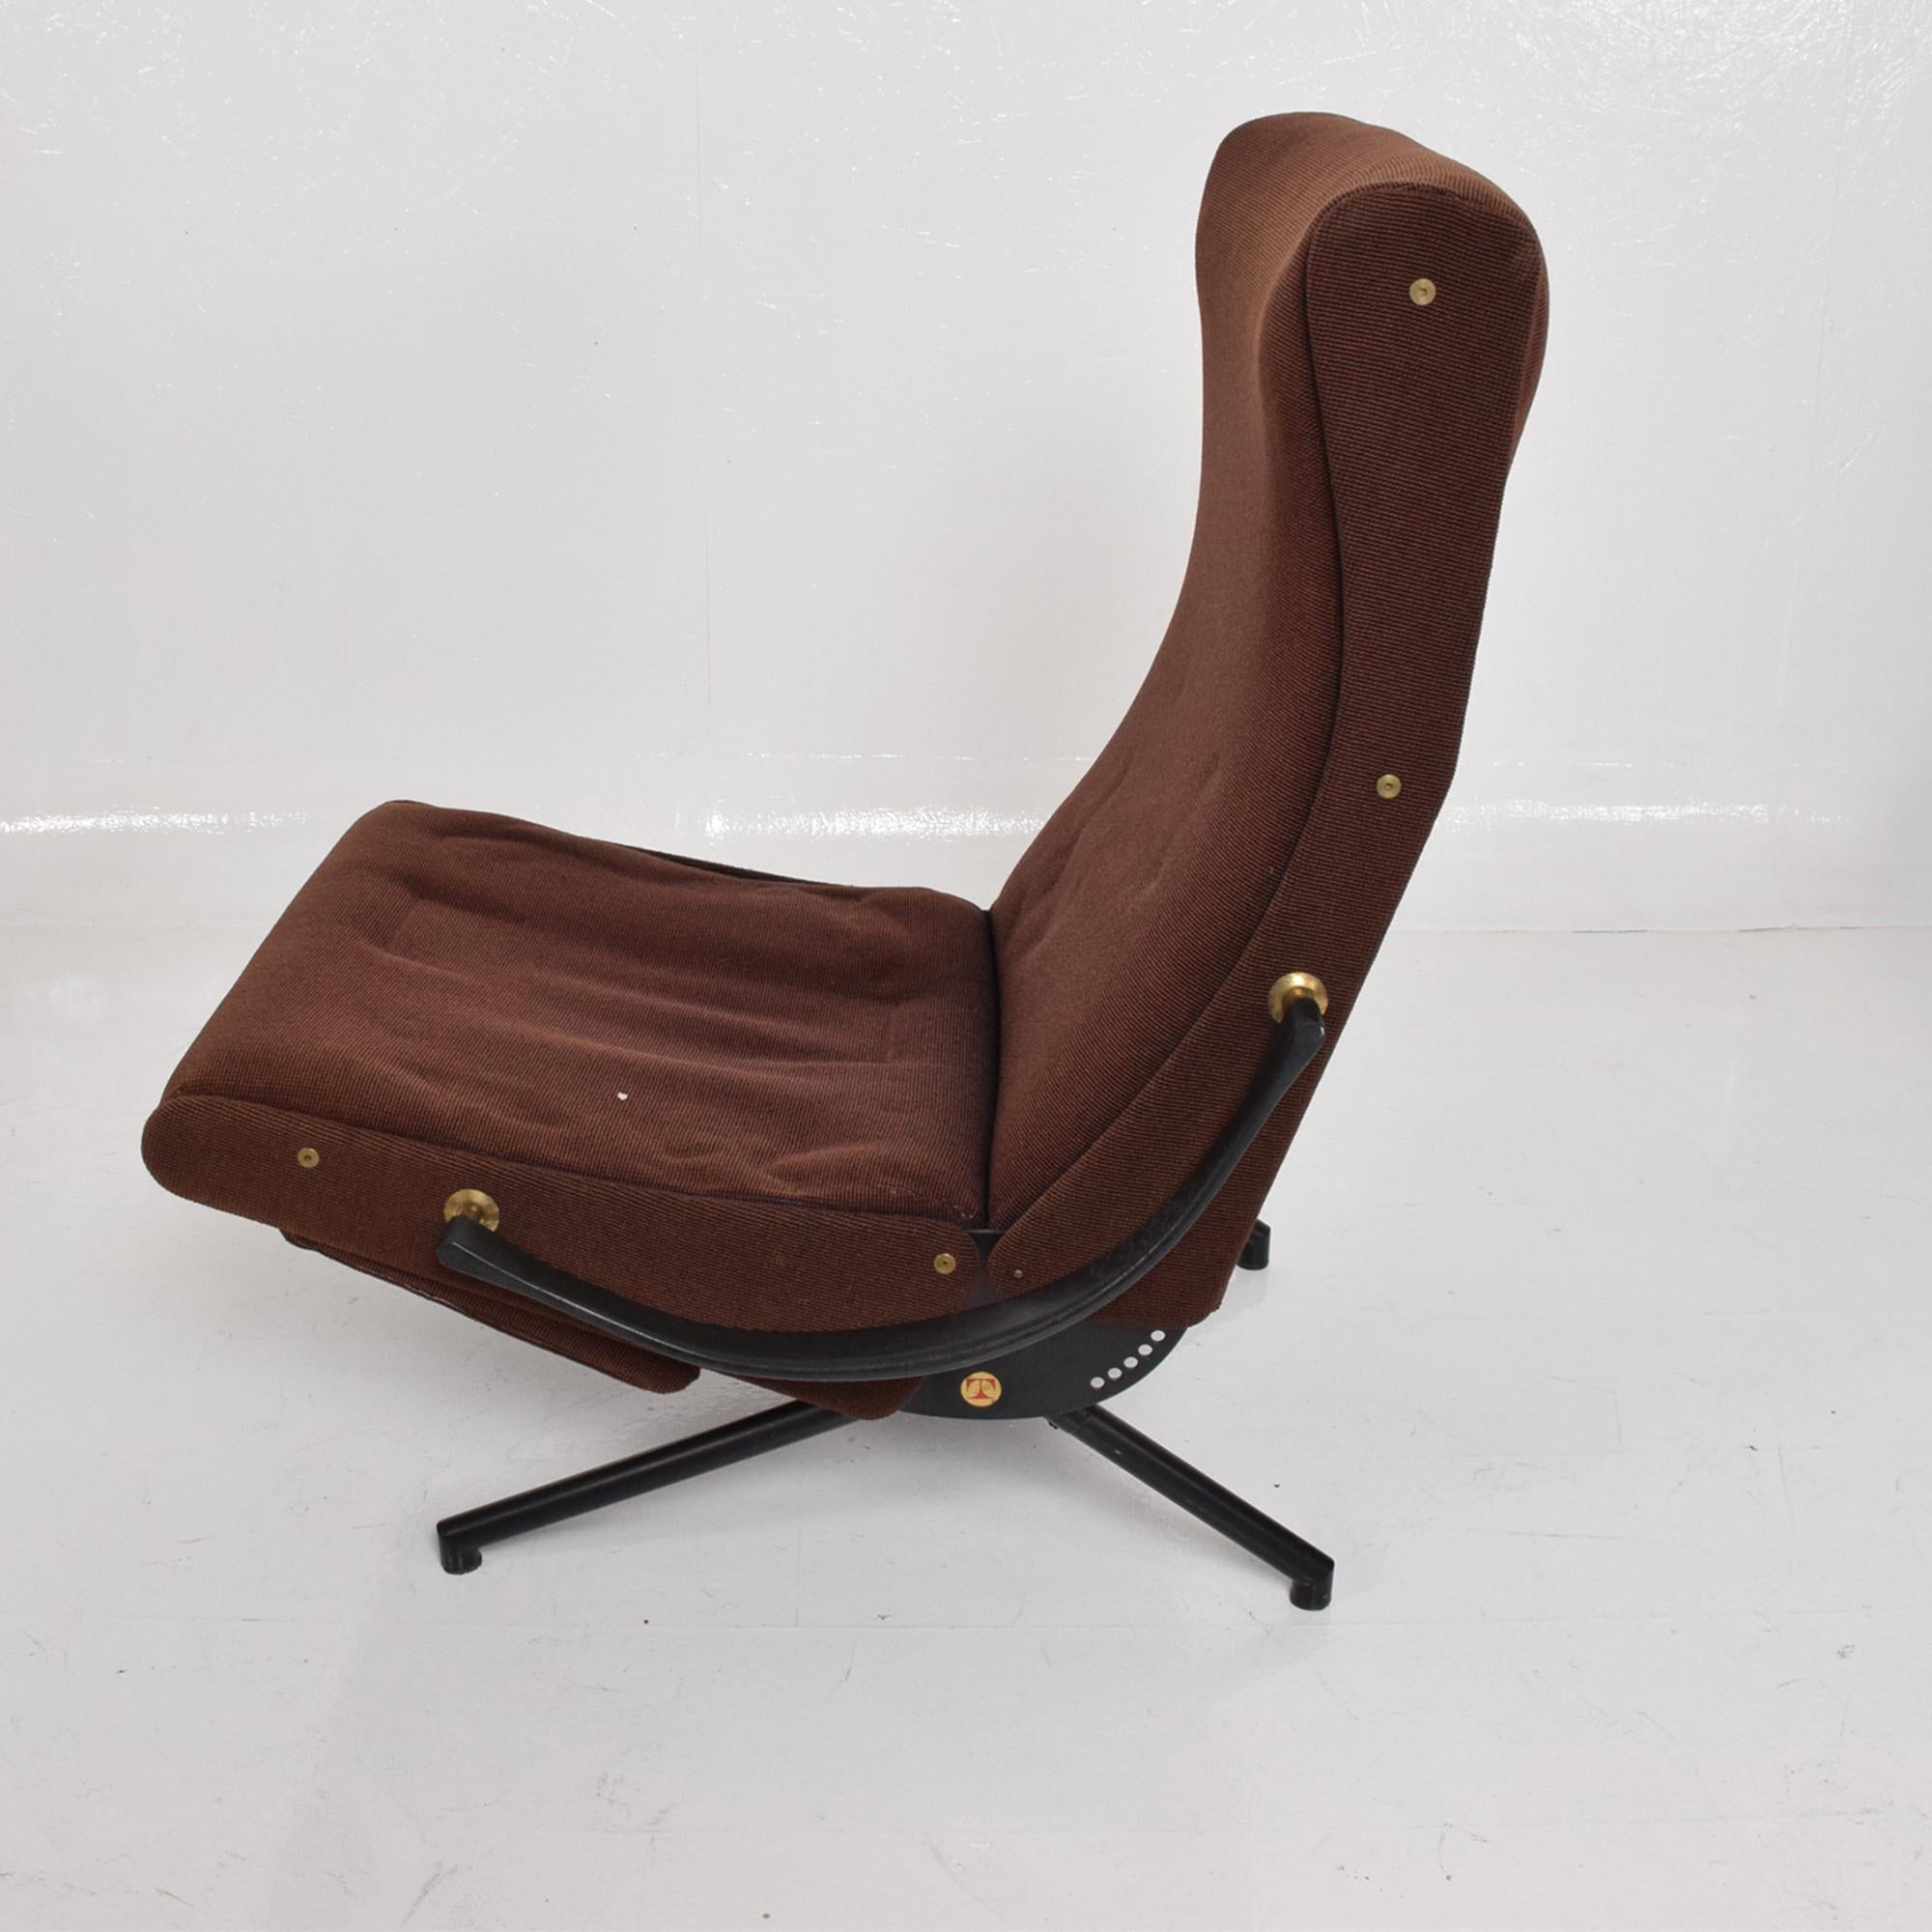 P40 Chaise Lounge Chair by Osvaldo Borsani for Tecno Italy 1960s 
Original brown upholstery with brass accents.
Original label present
37 H x 28 W x 28 D, seat: 14.5 H.
Adjustable back expandable footrest.
Original Unrestored Vintage